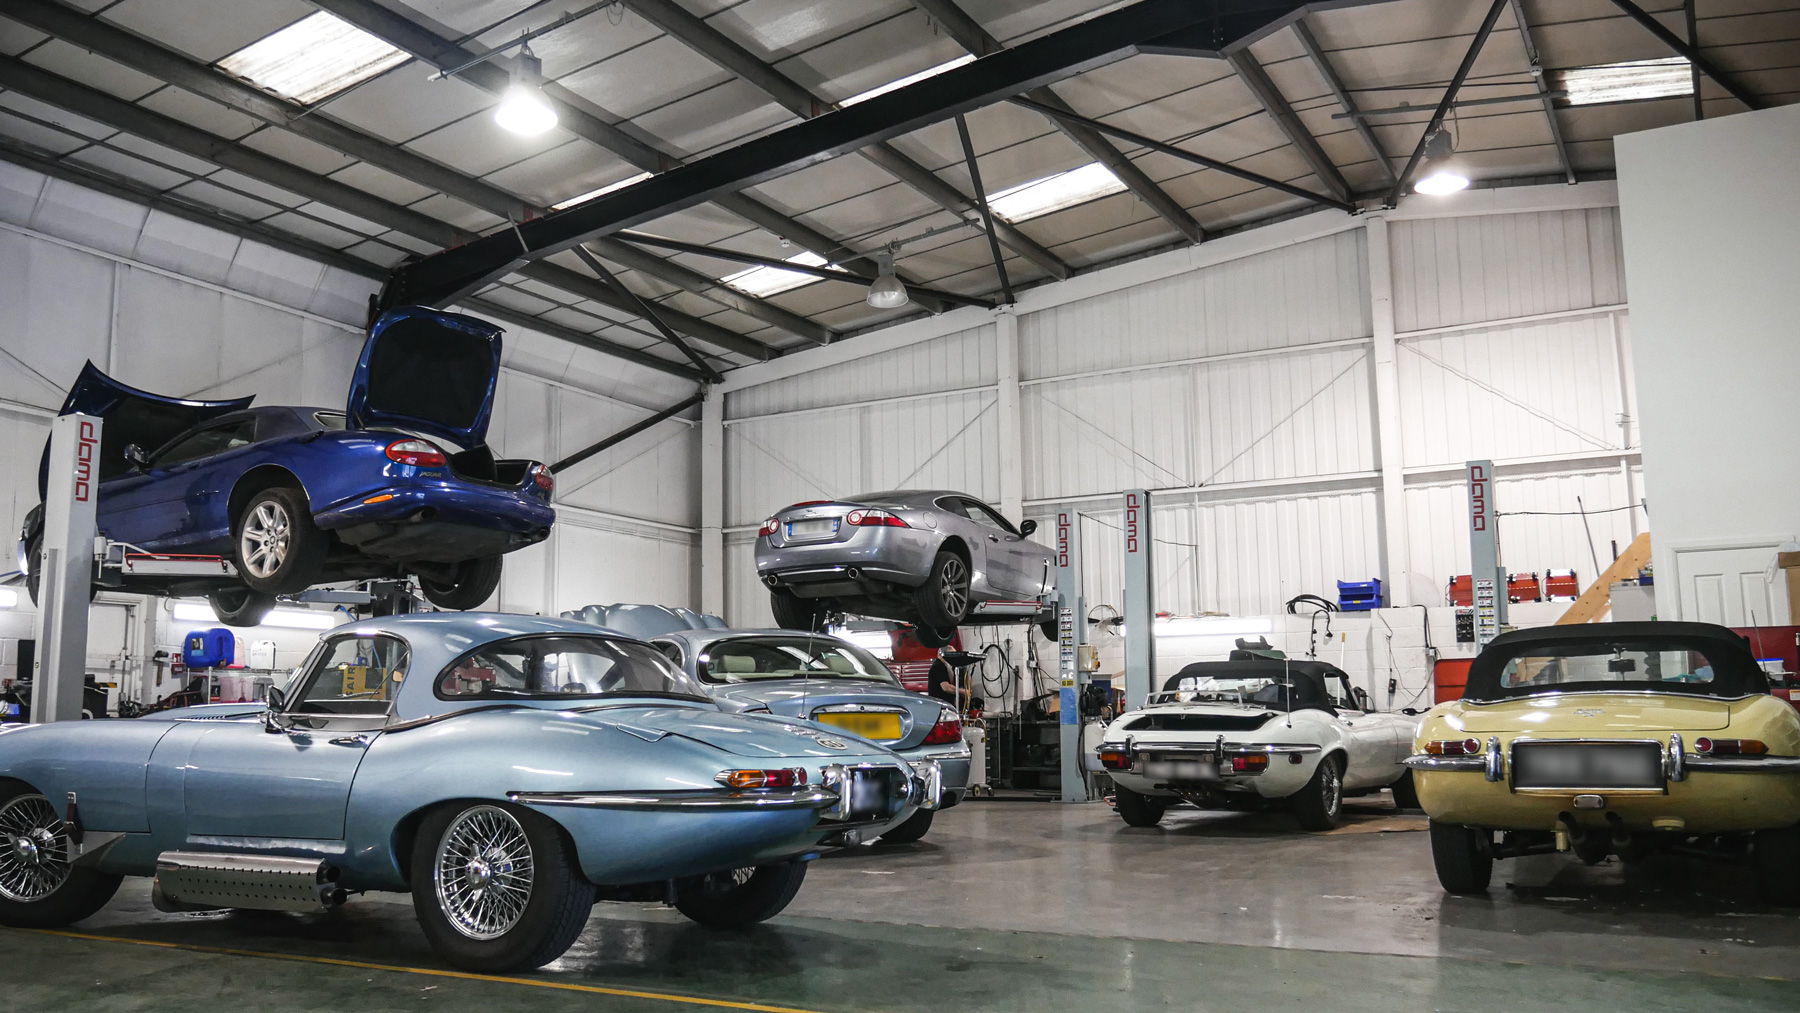 Wide shot of the workshop showing classic and modern Jaguars being repaired  